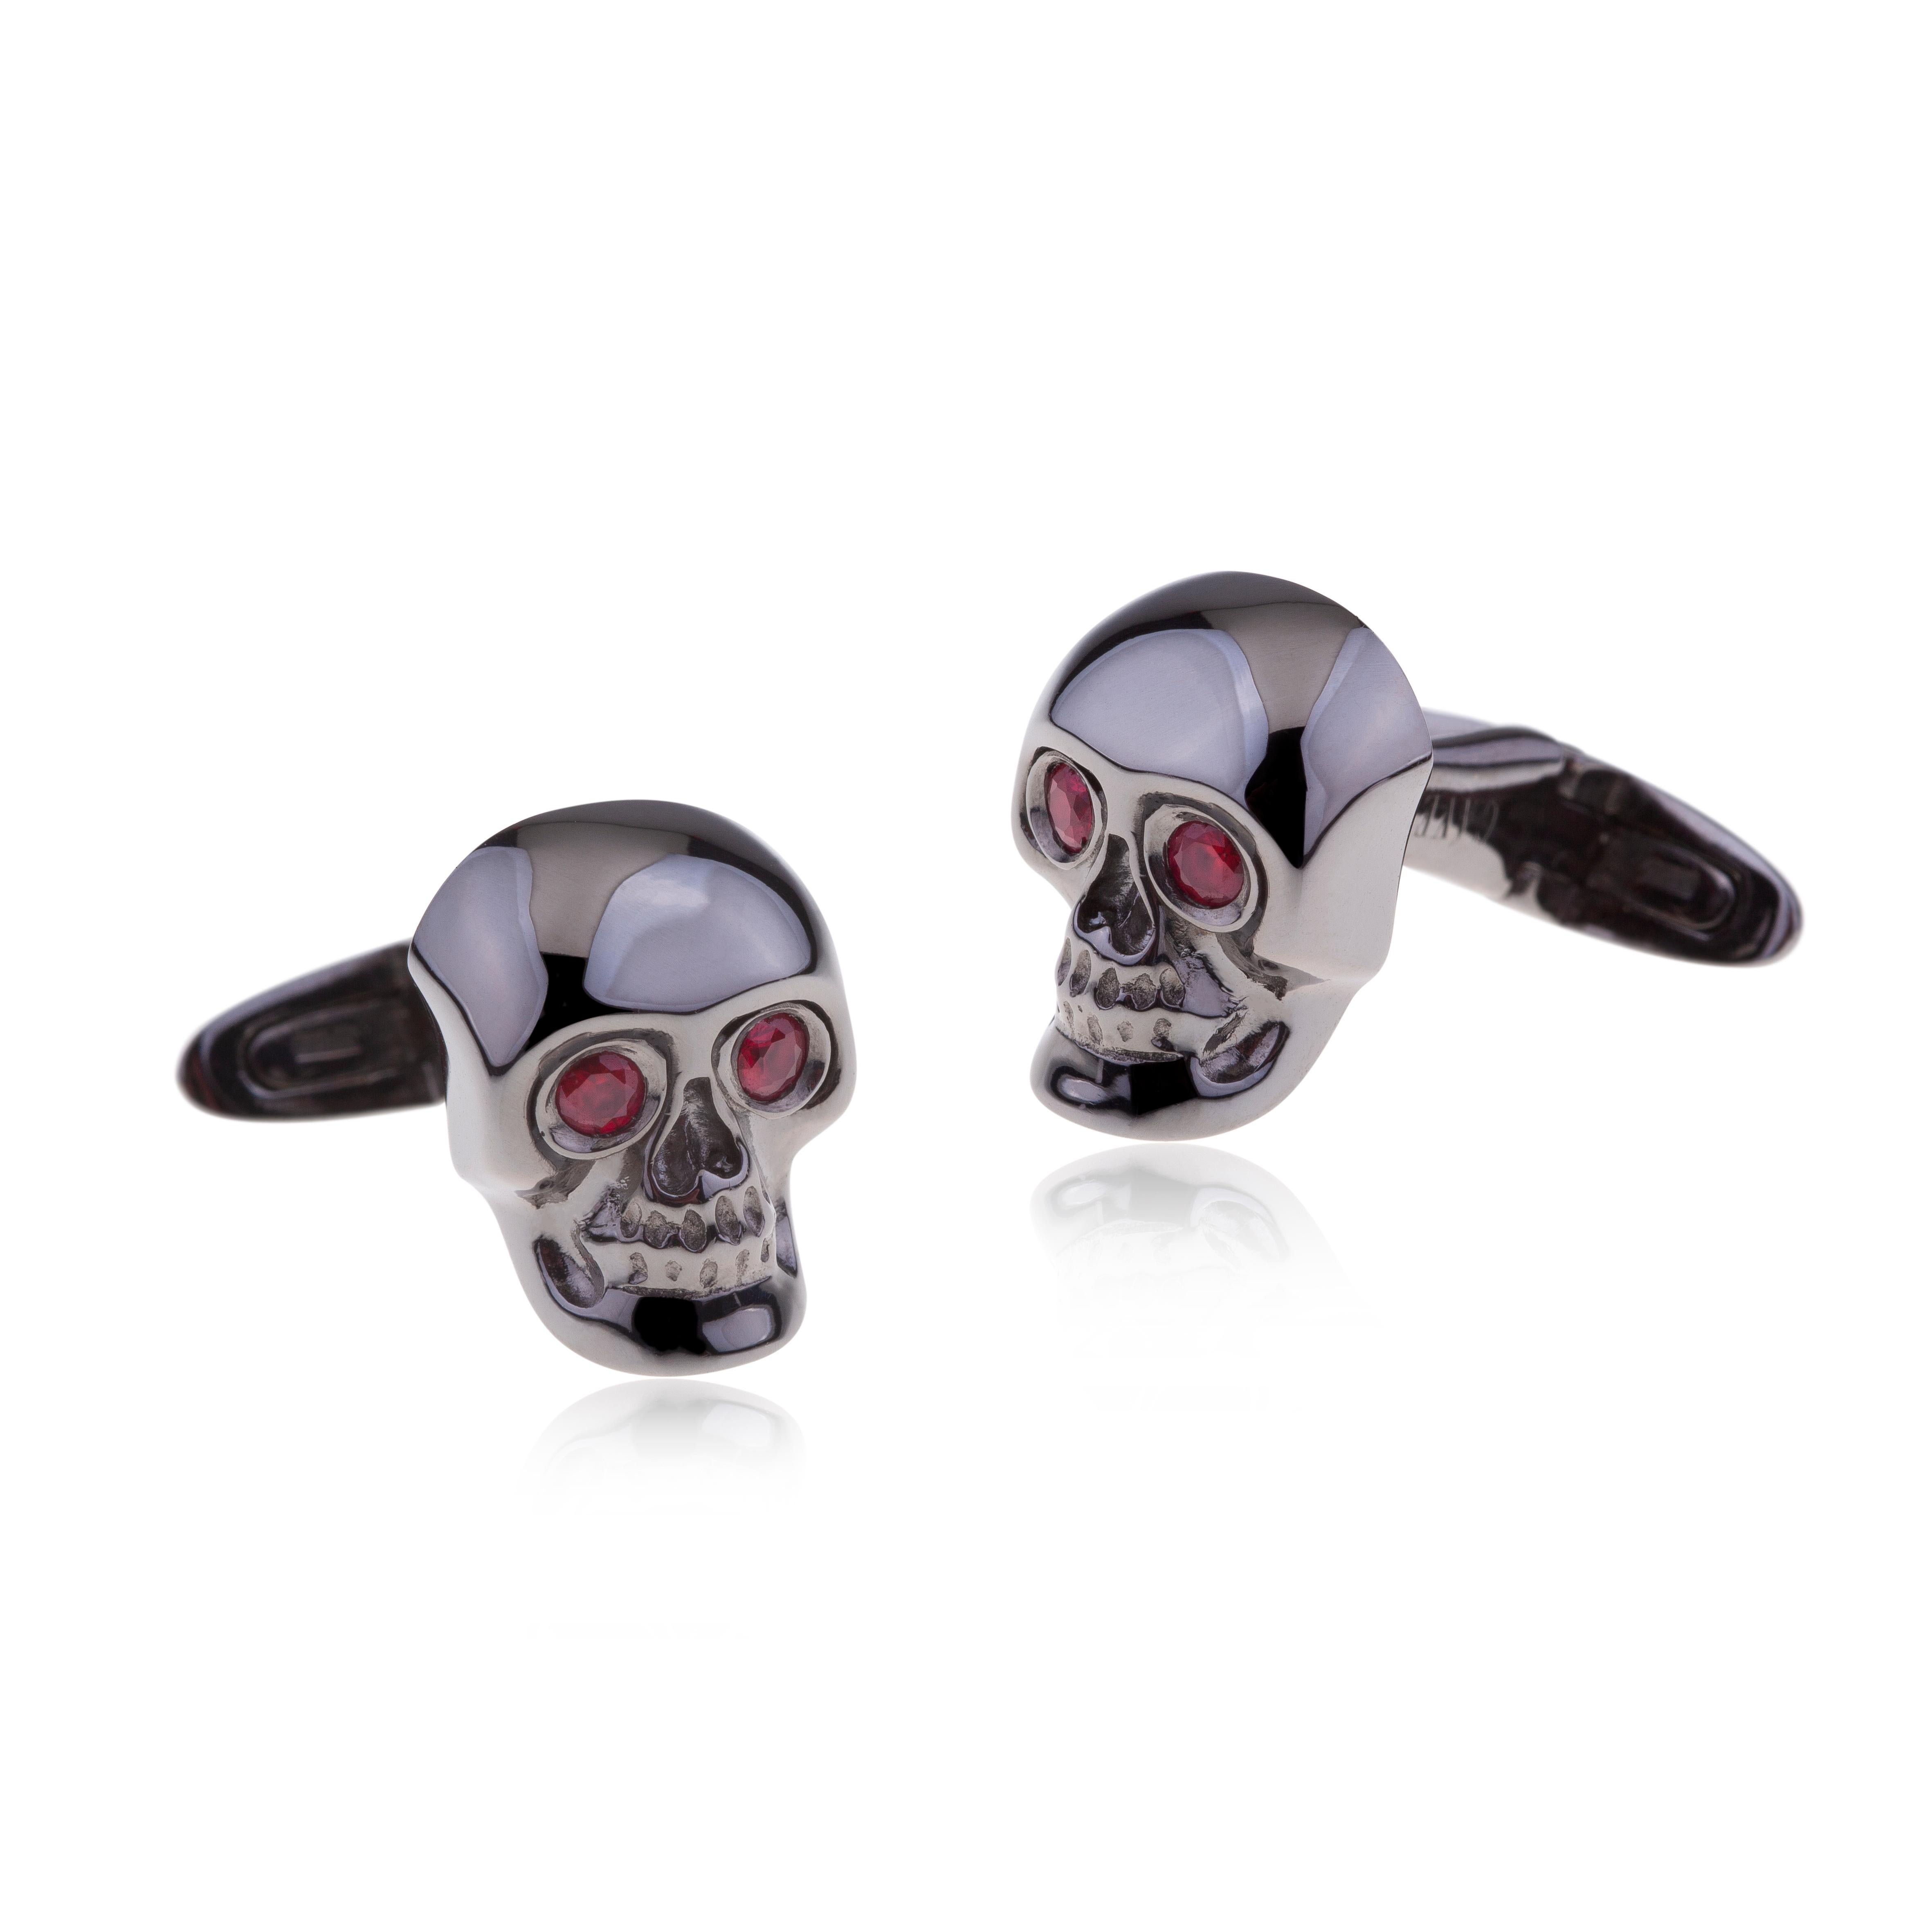 Contemporary Cufflinks Black Gold from Gavello Featuring a Skull Head with Rubies For Sale